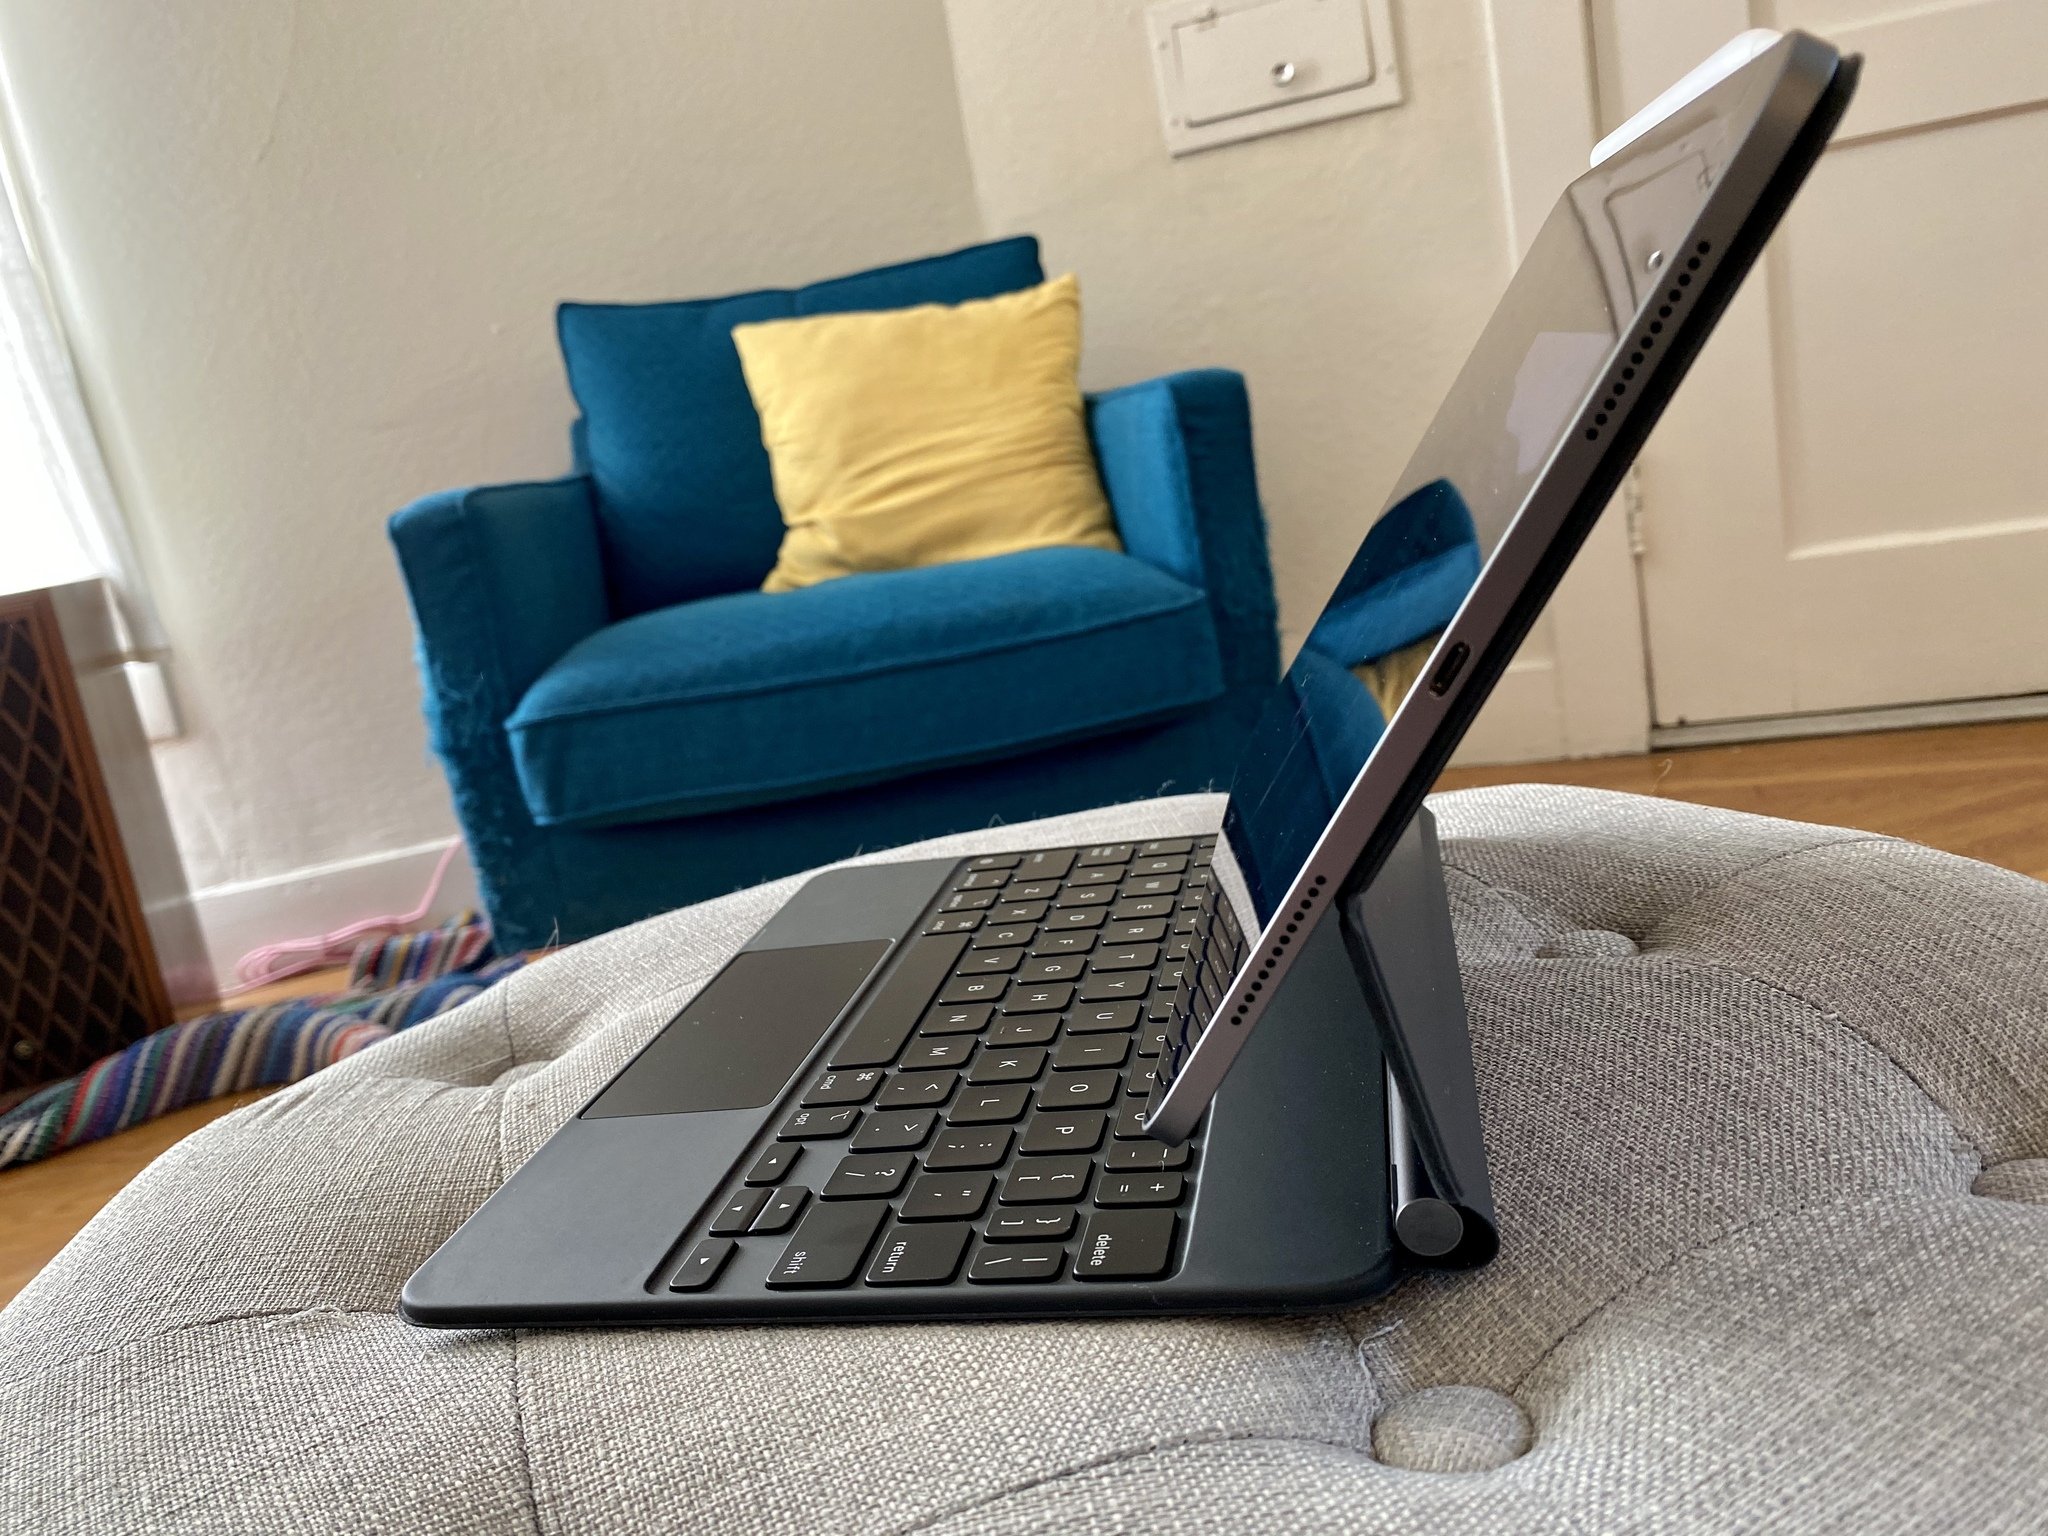 Best Keyboard Cases for the 2020 11-inch iPad Pro 2021 | iMore